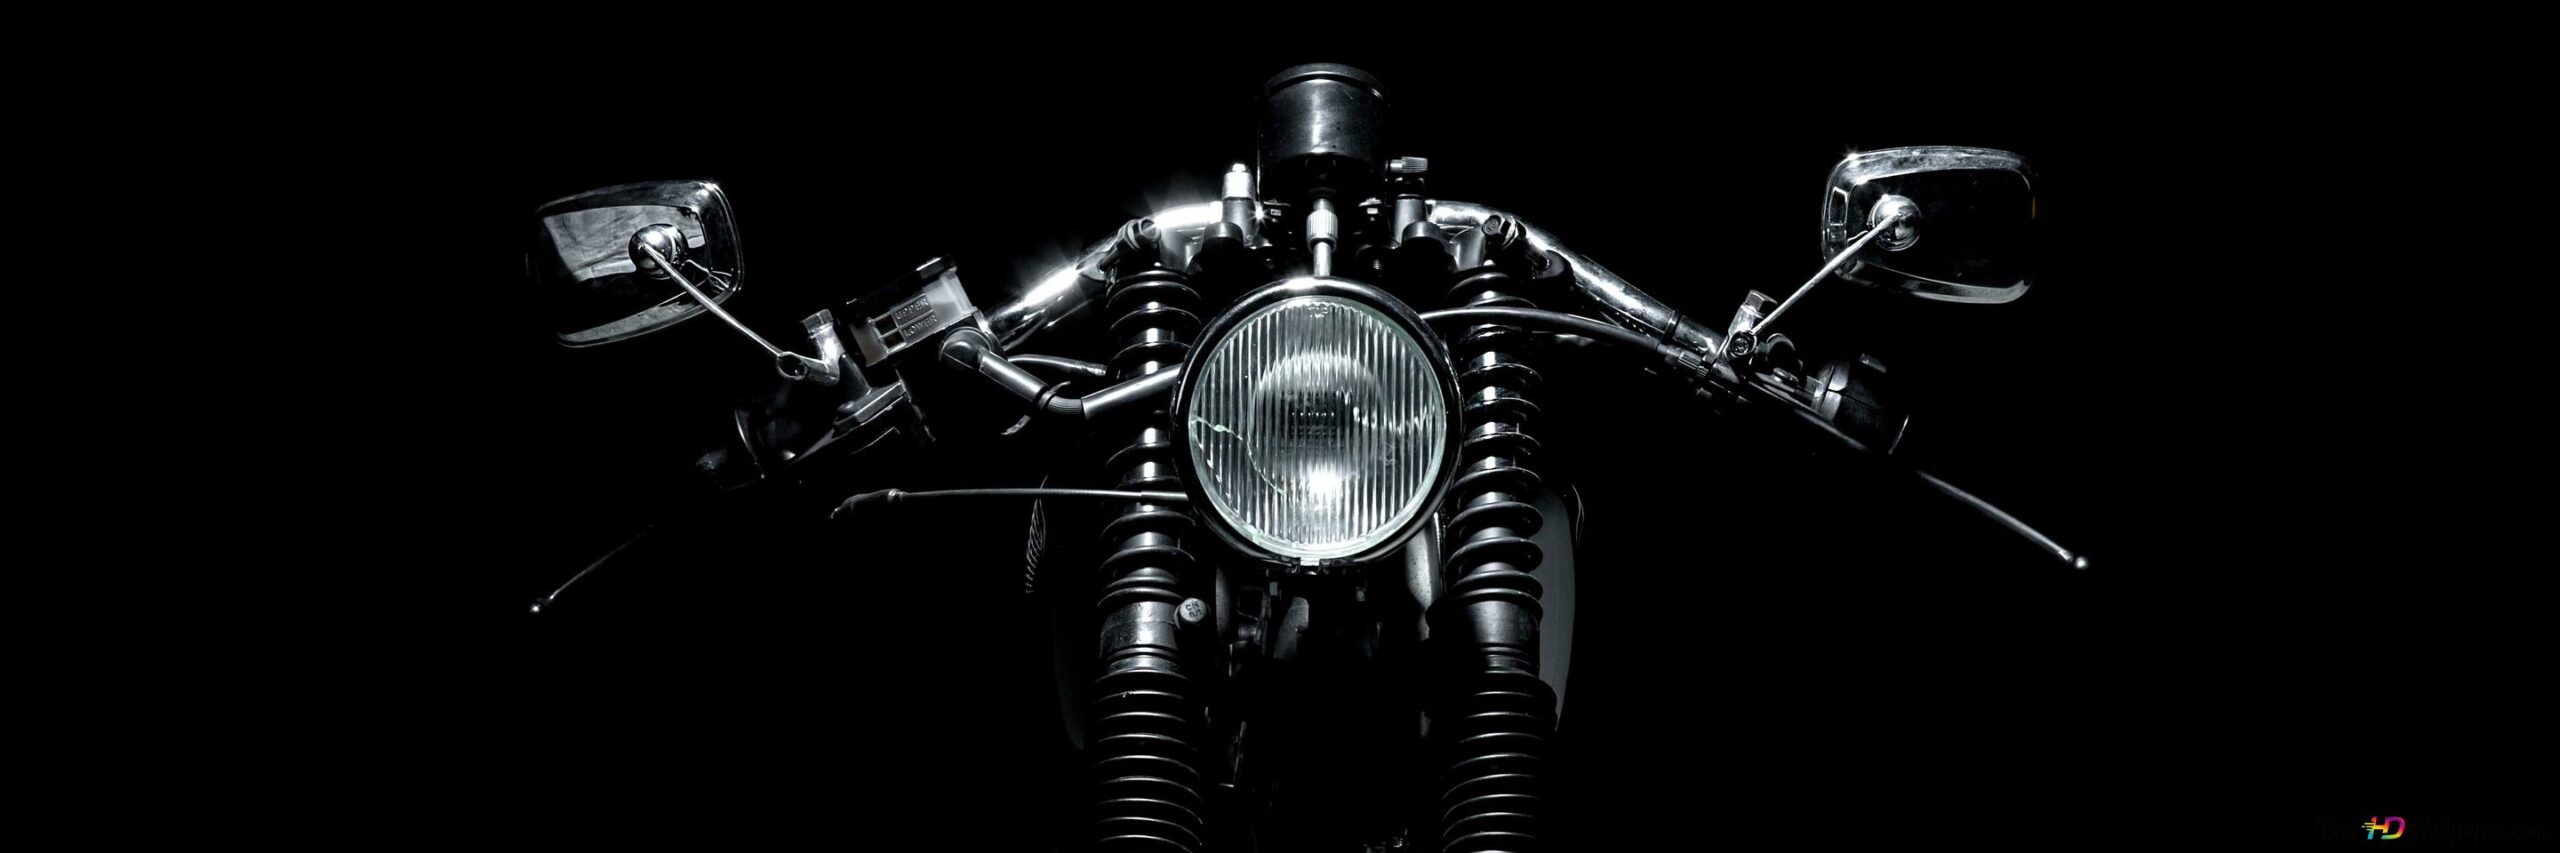 black and white motorcycle wallpaper 2880x960 104 scaled